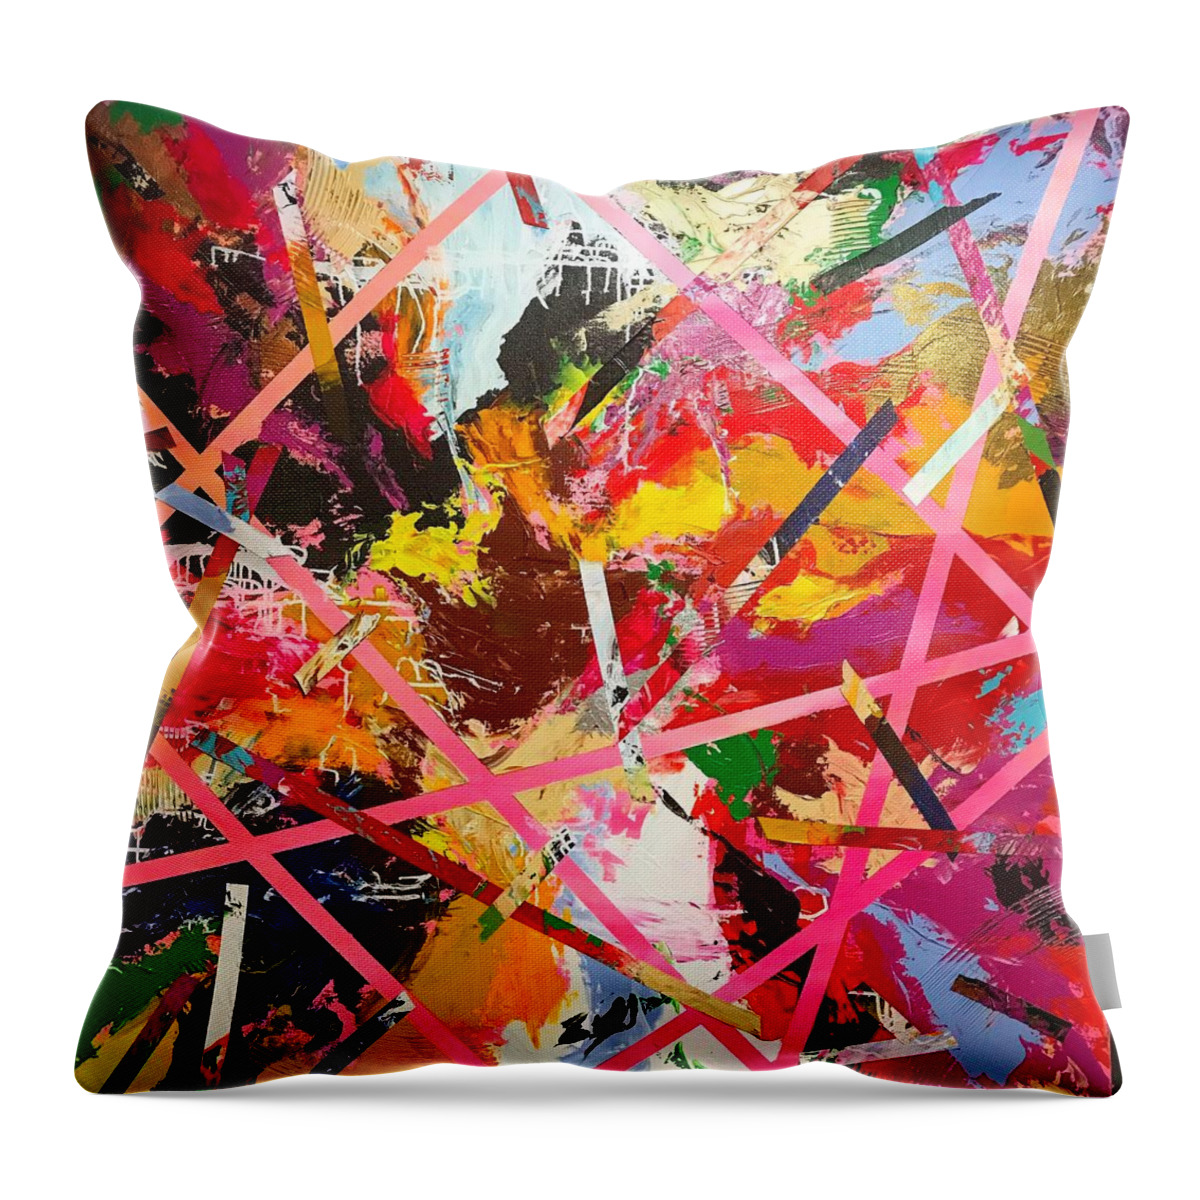 #abstractexpressionism #acrylicpainting #juliusdewitthannah # Throw Pillow featuring the painting Untitled by Julius Hannah